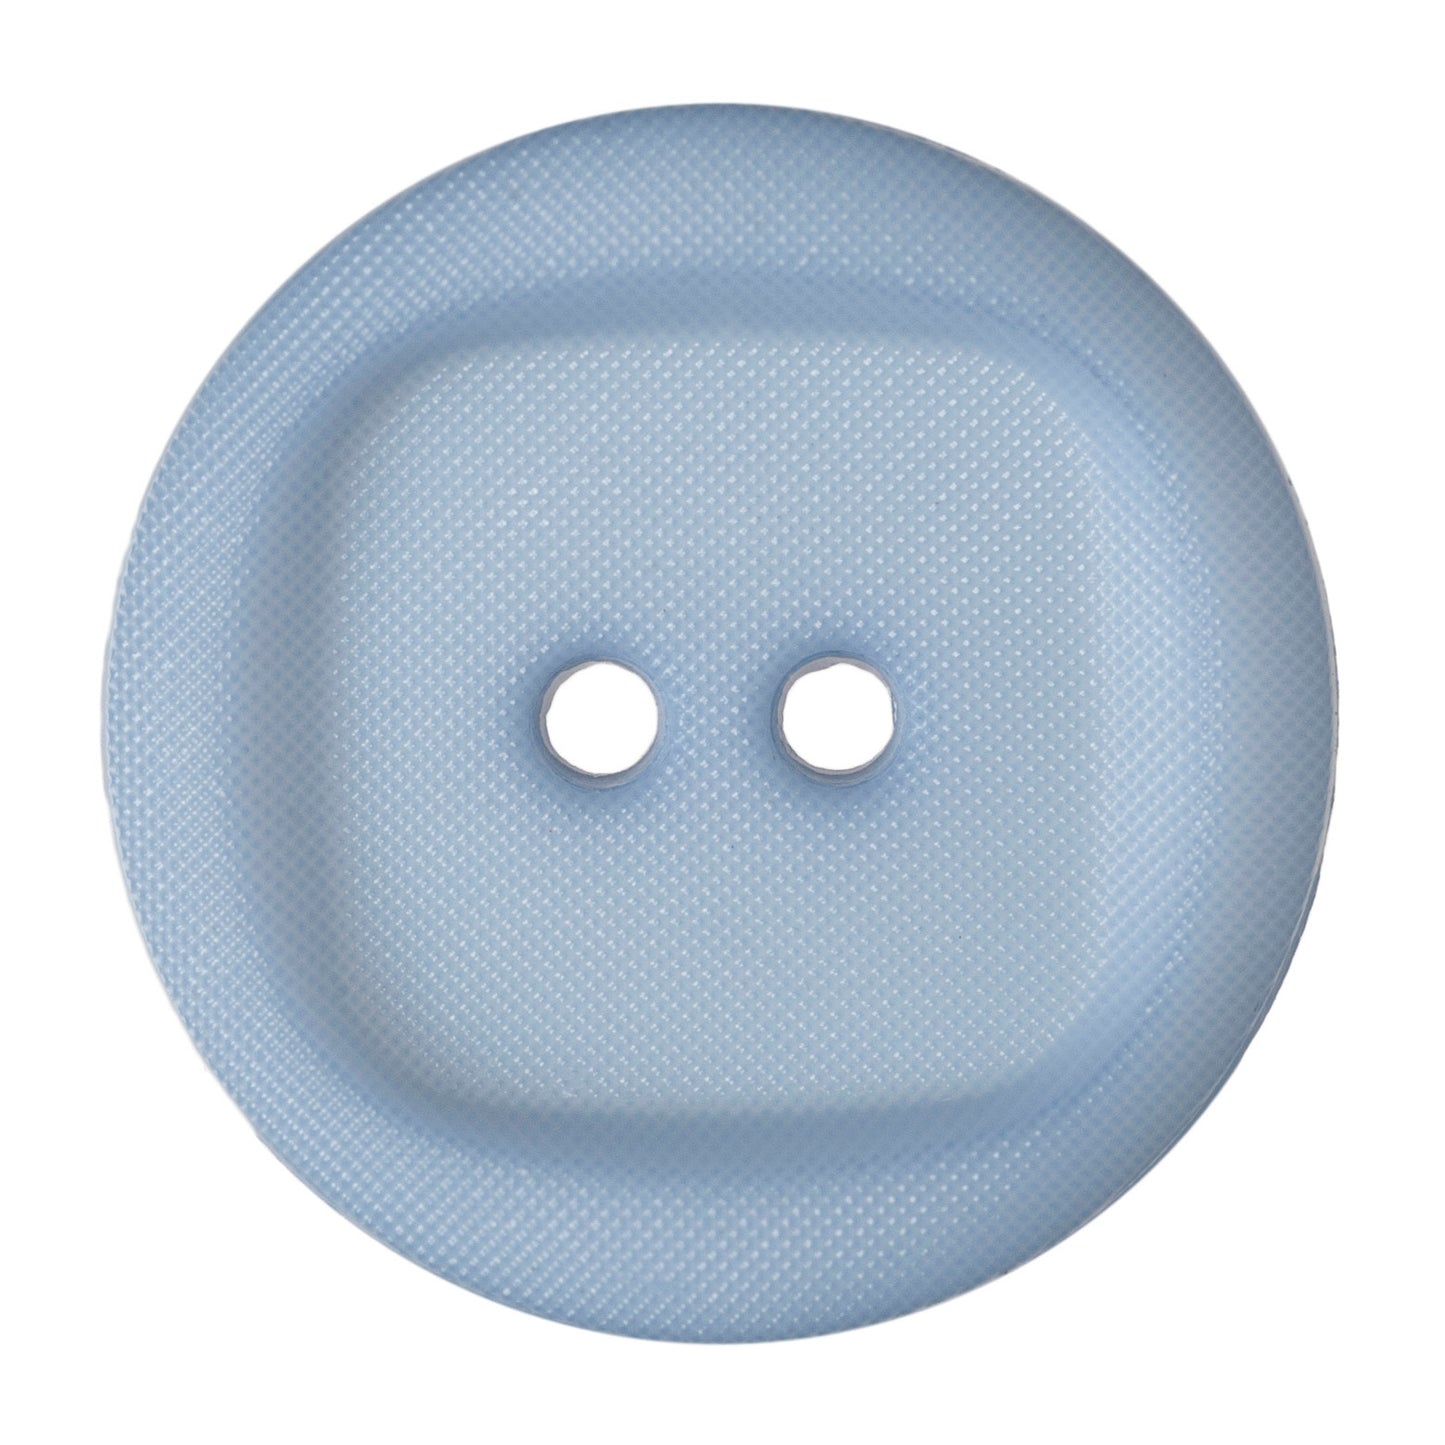 2 Hole Wavy with Square Insert Button - 20mm - Lilac [LD6.4]